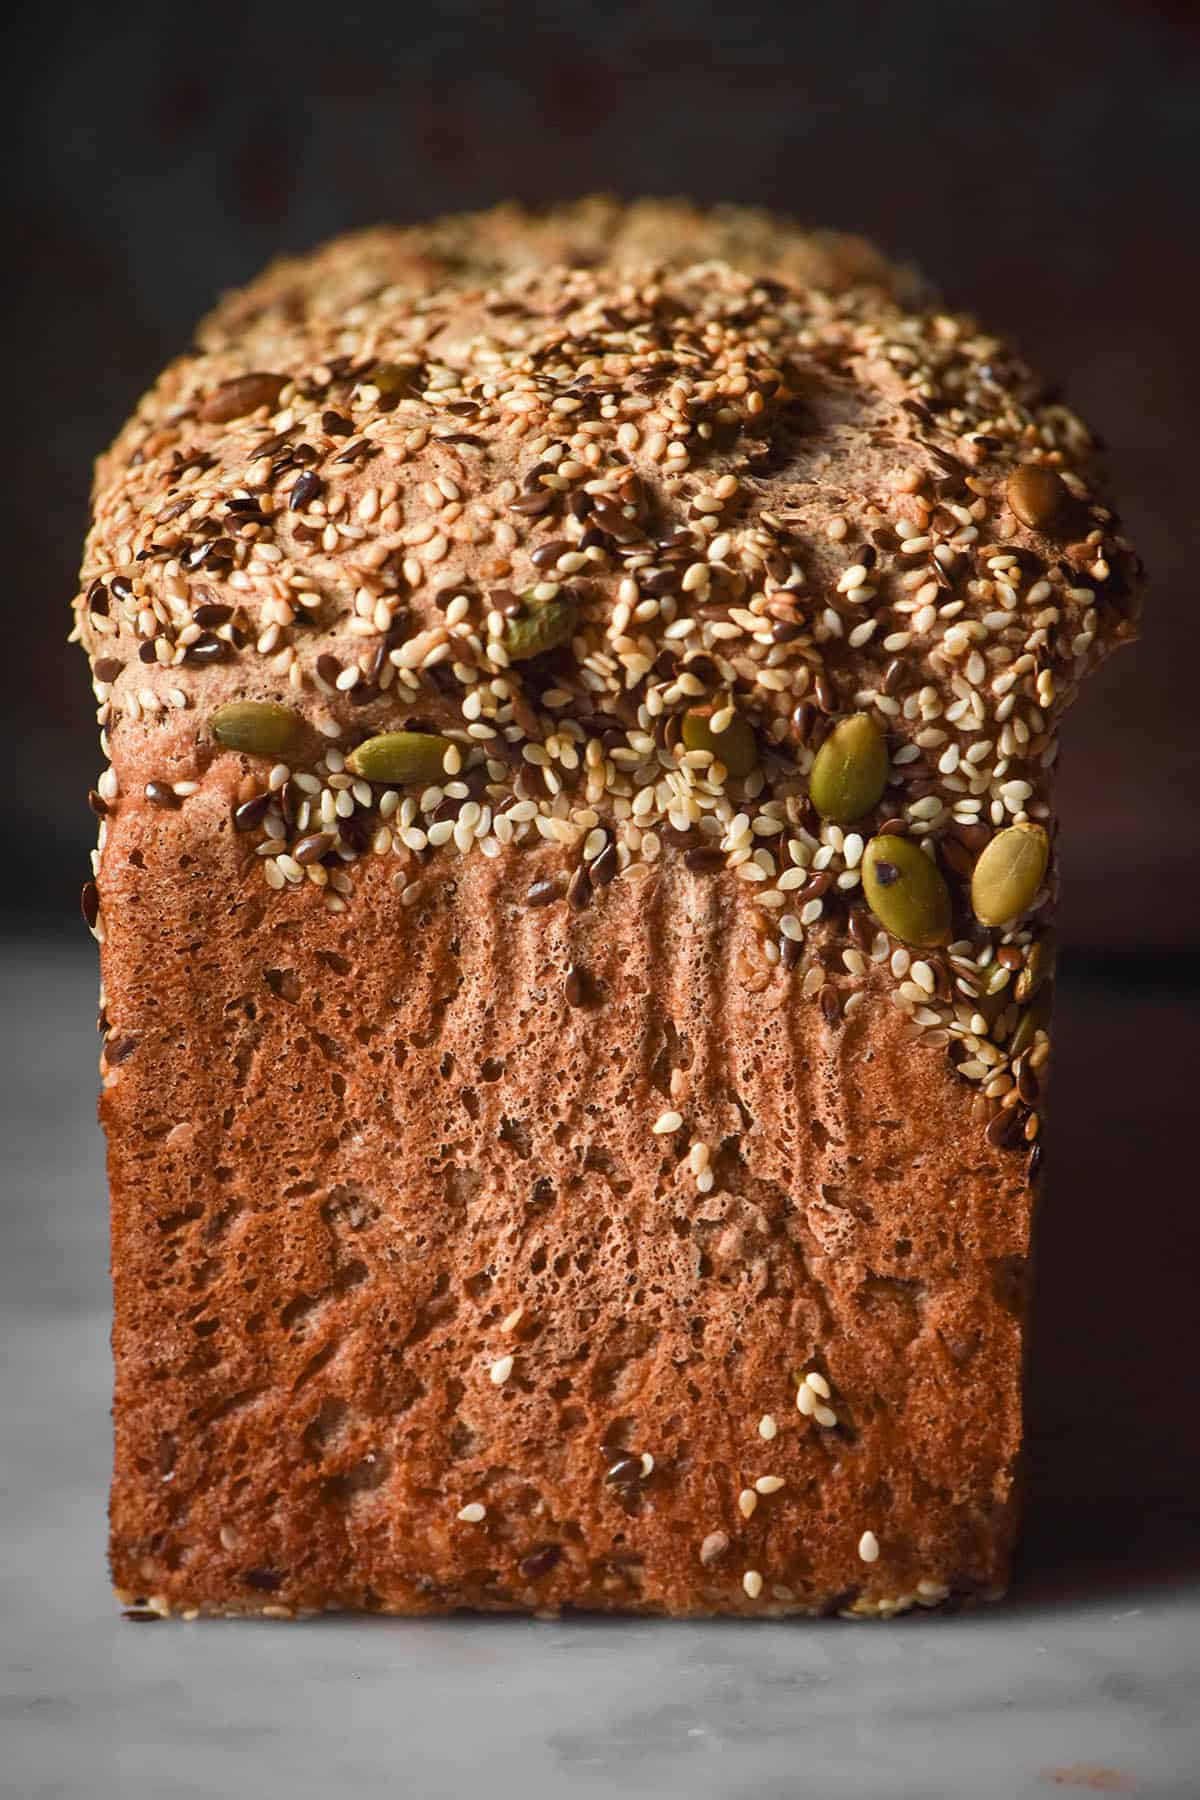 A moody side on image of a loaf of gluten free seeded bread on a white marble table against a dark backdrop